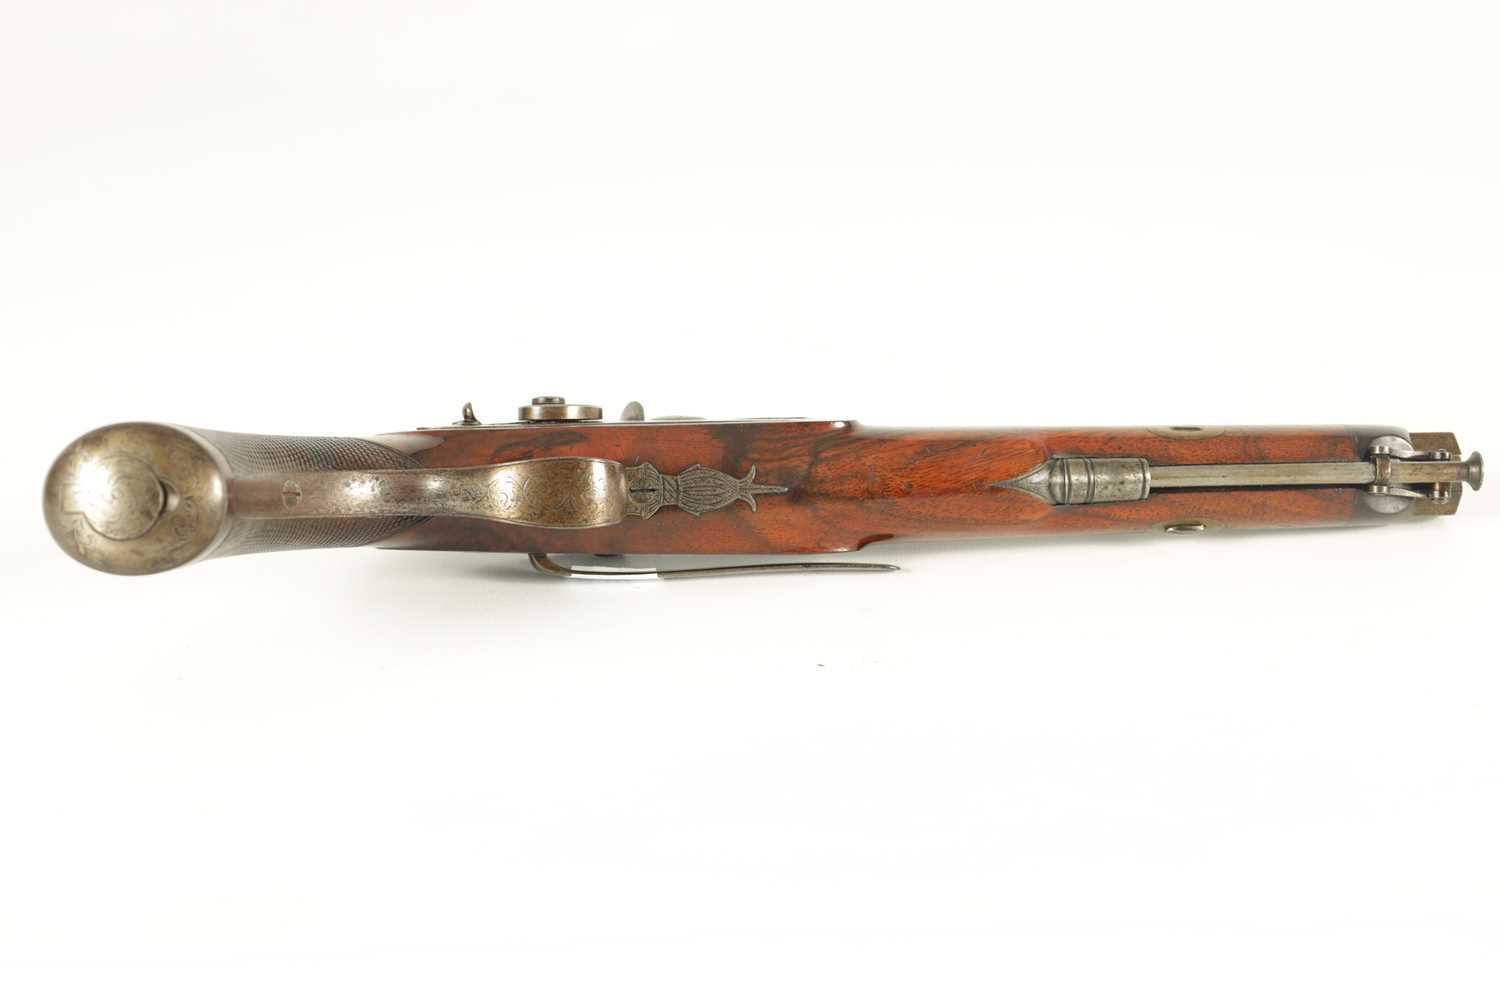 G R COLLIS, BIRMINGHAM. AN EARLY 19TH CENTURY WALNUT PERCUSSION HOLSTER PISTOL - Image 6 of 10